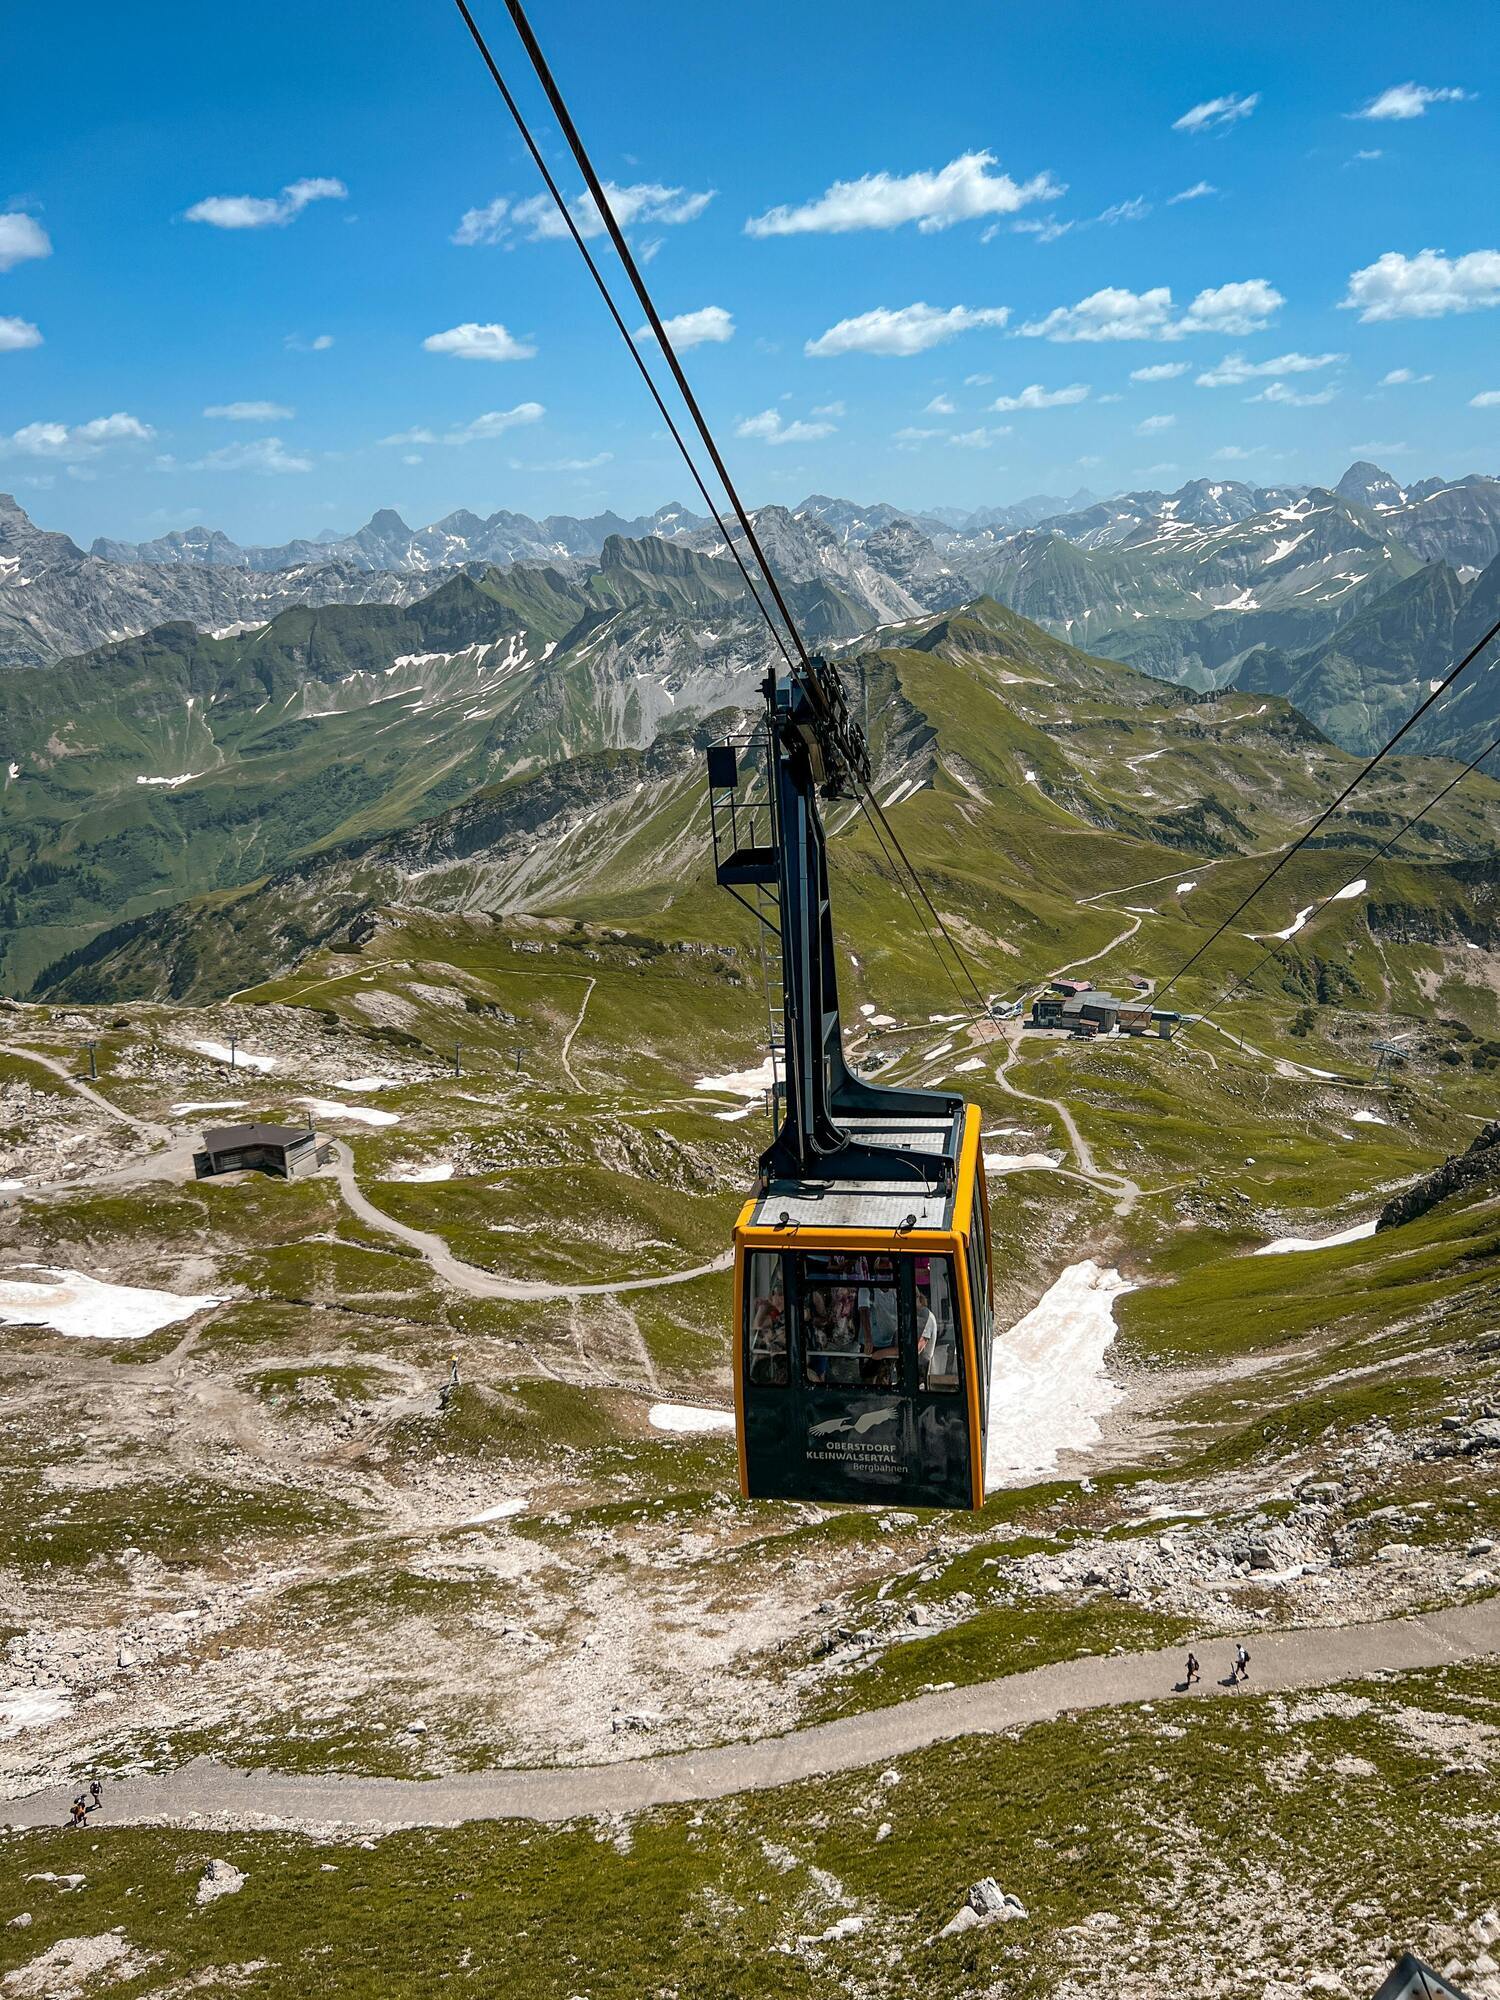 Ski resorts in France, Italy and Switzerland are left without snow: artificial snow does not save, locals are sounding the alarm